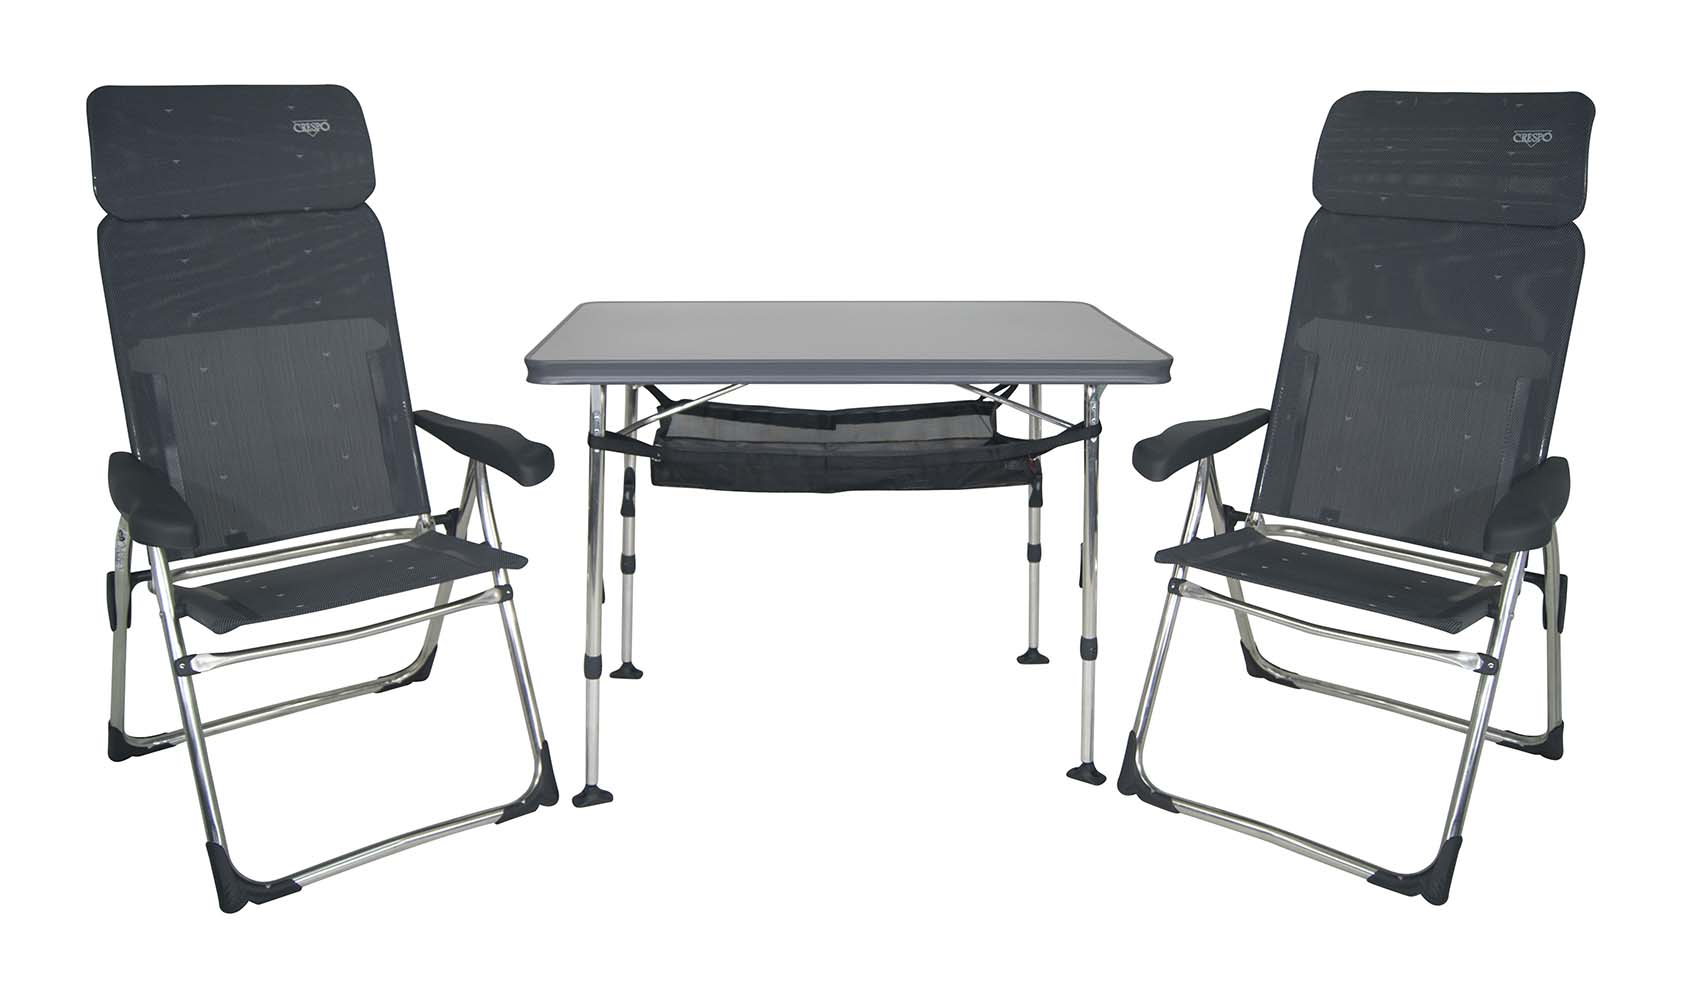 1153850 A set comprising 2 AL-213 Classic Compact chairs, a table AL-246 with storage net, and a storage bag. Extremely compact and ideal for 2 persons. The set is highly portable and comes with a storage bag. In total, the set is foldable to a thickness of only 16 cm.